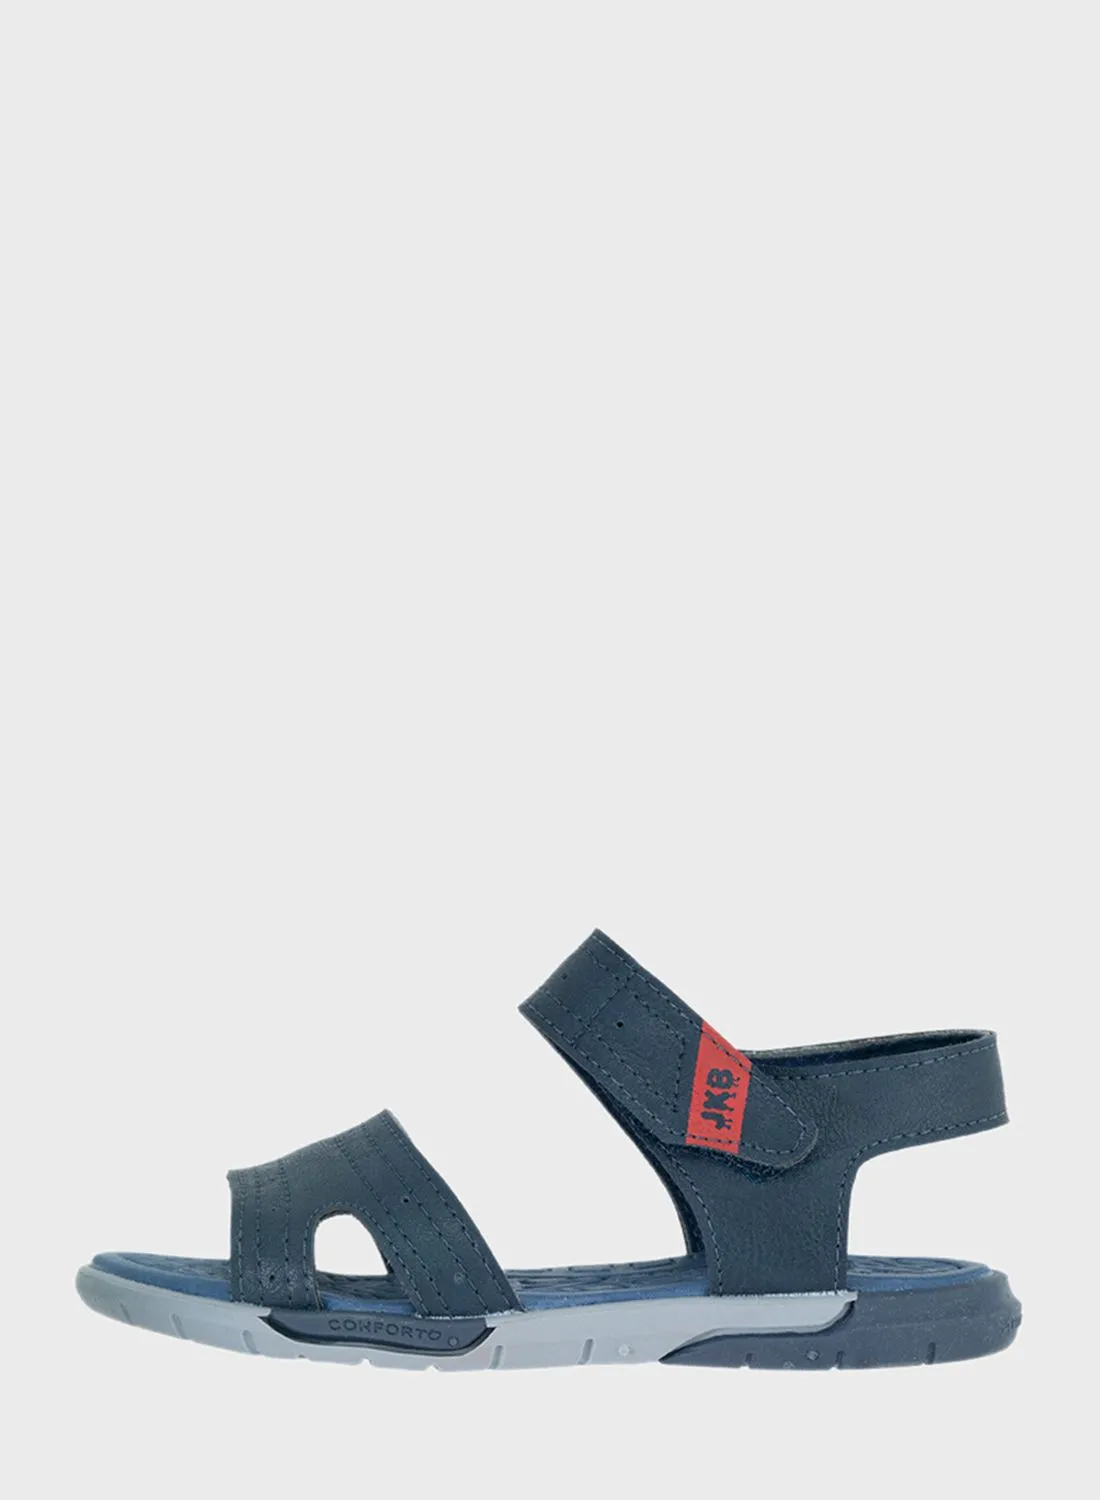 JUST KIDS BRANDS Youth Joao Sandals